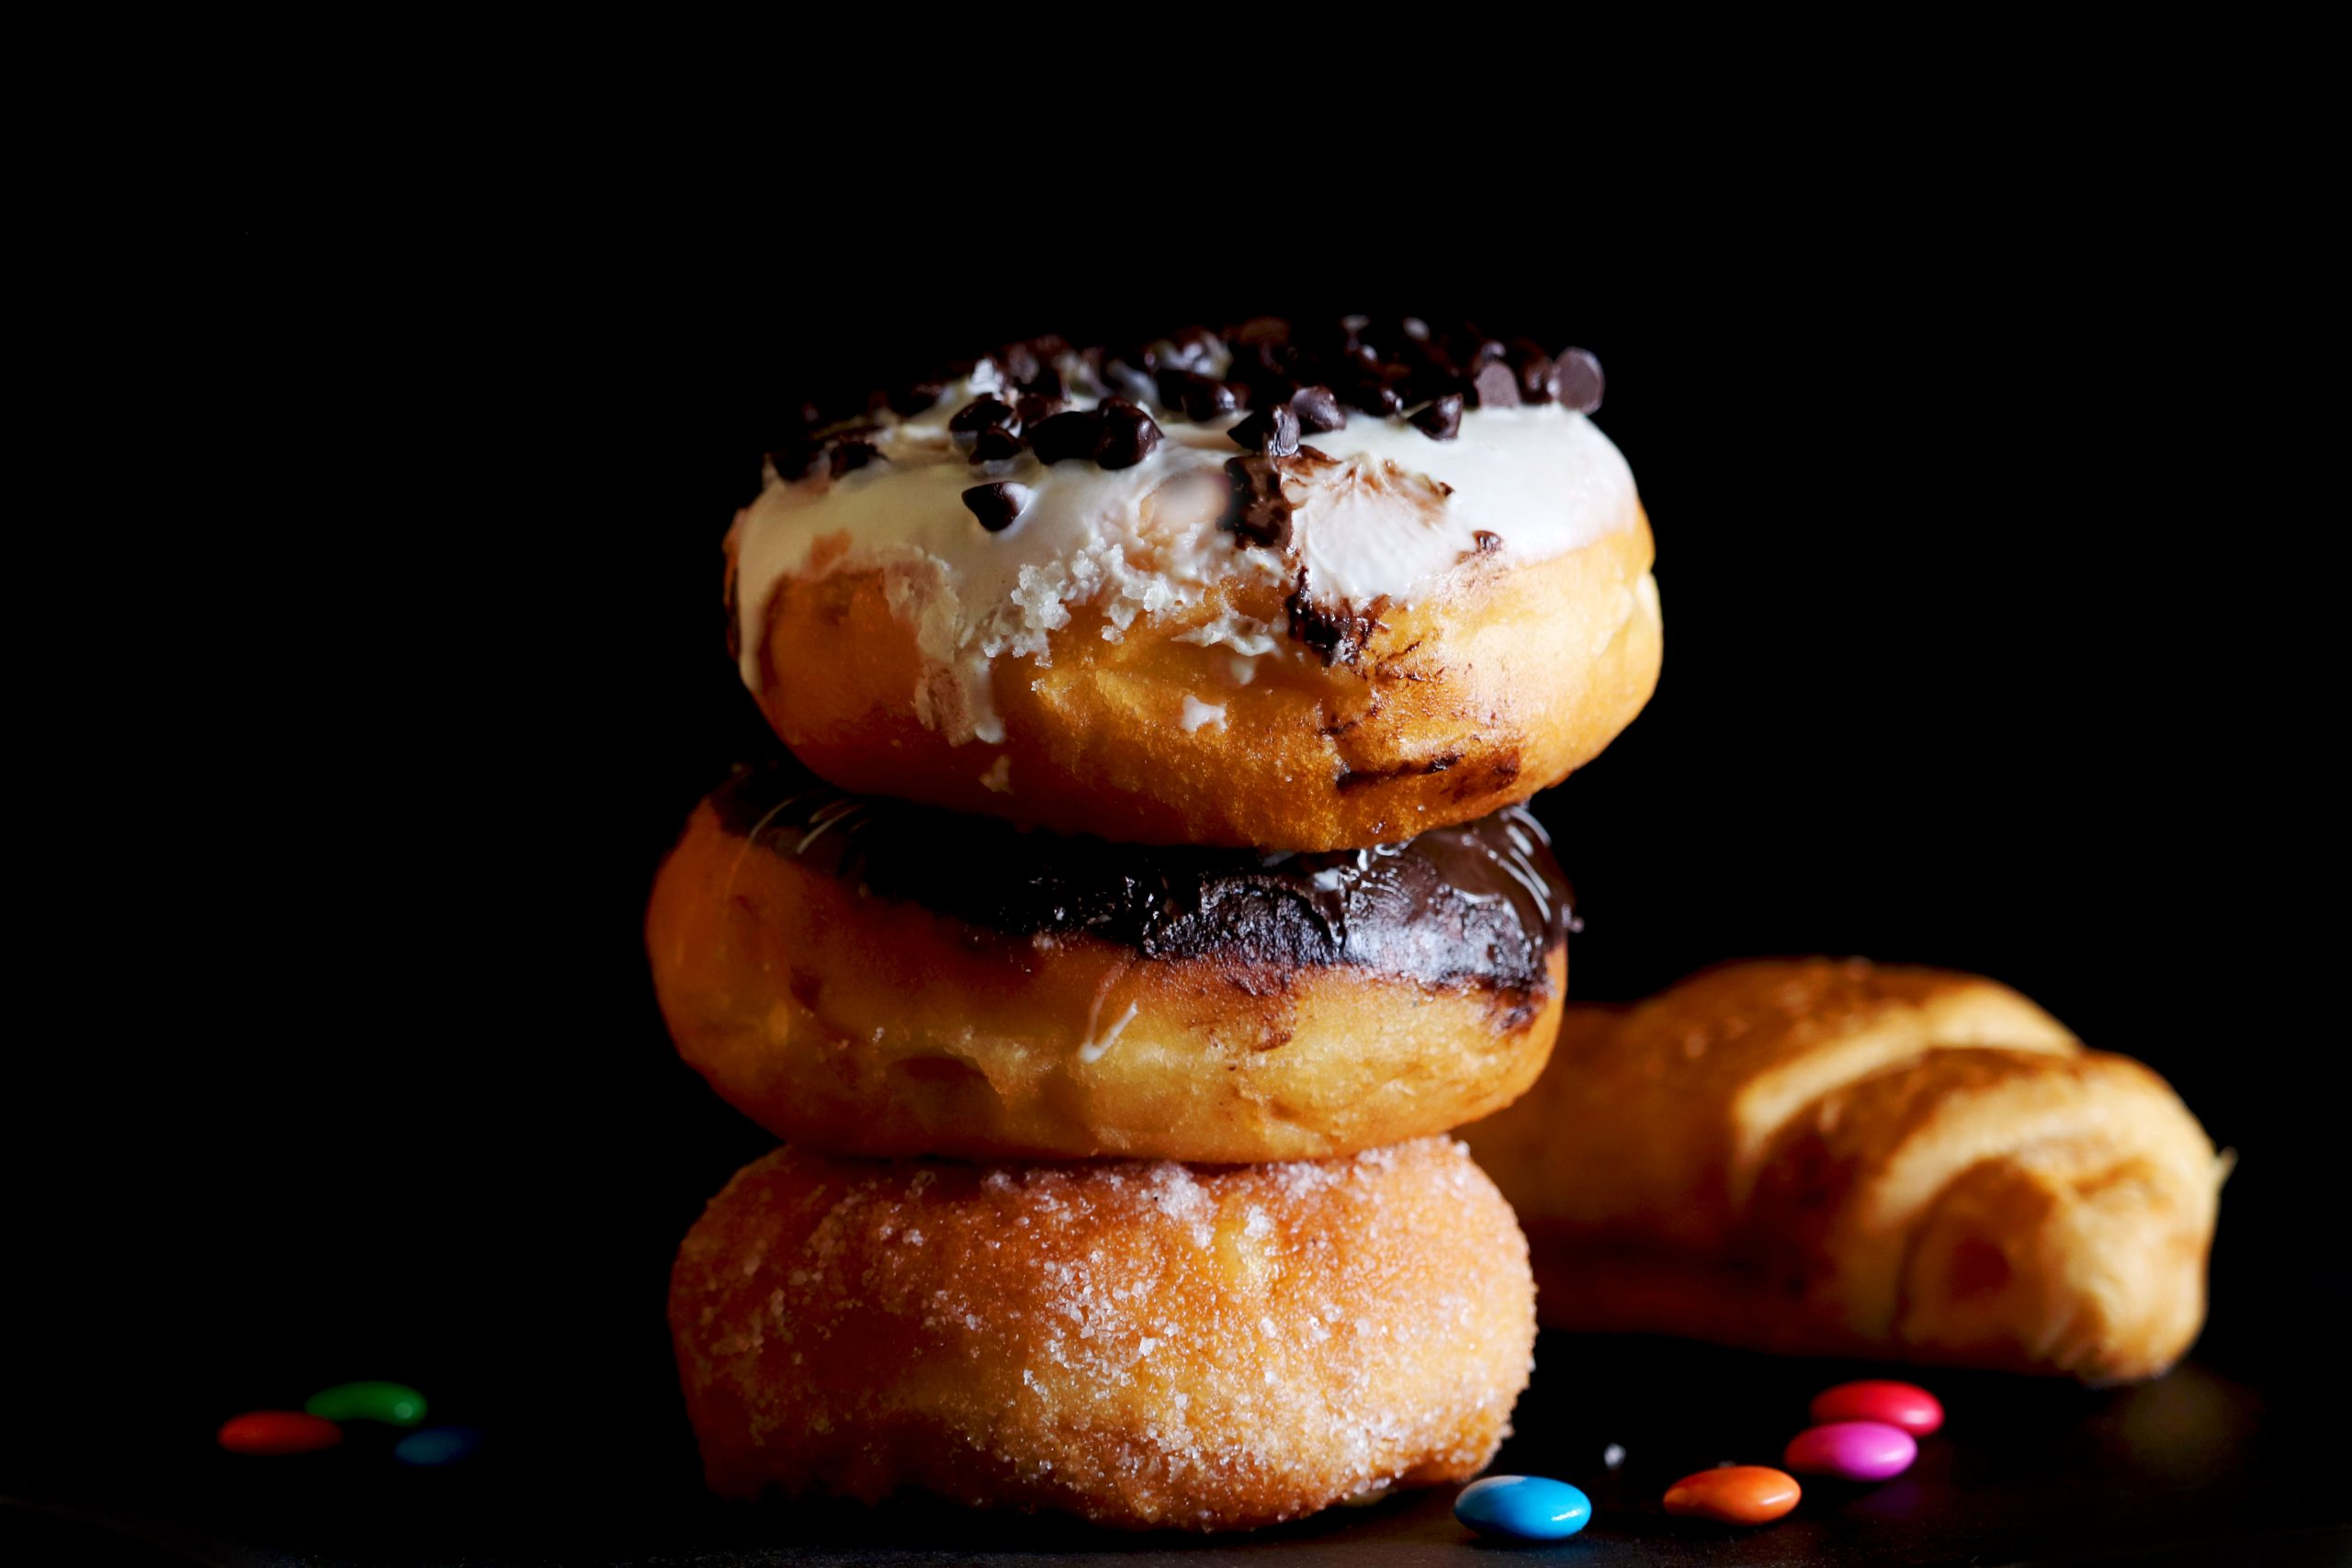 A pile of Donuts on Black Background